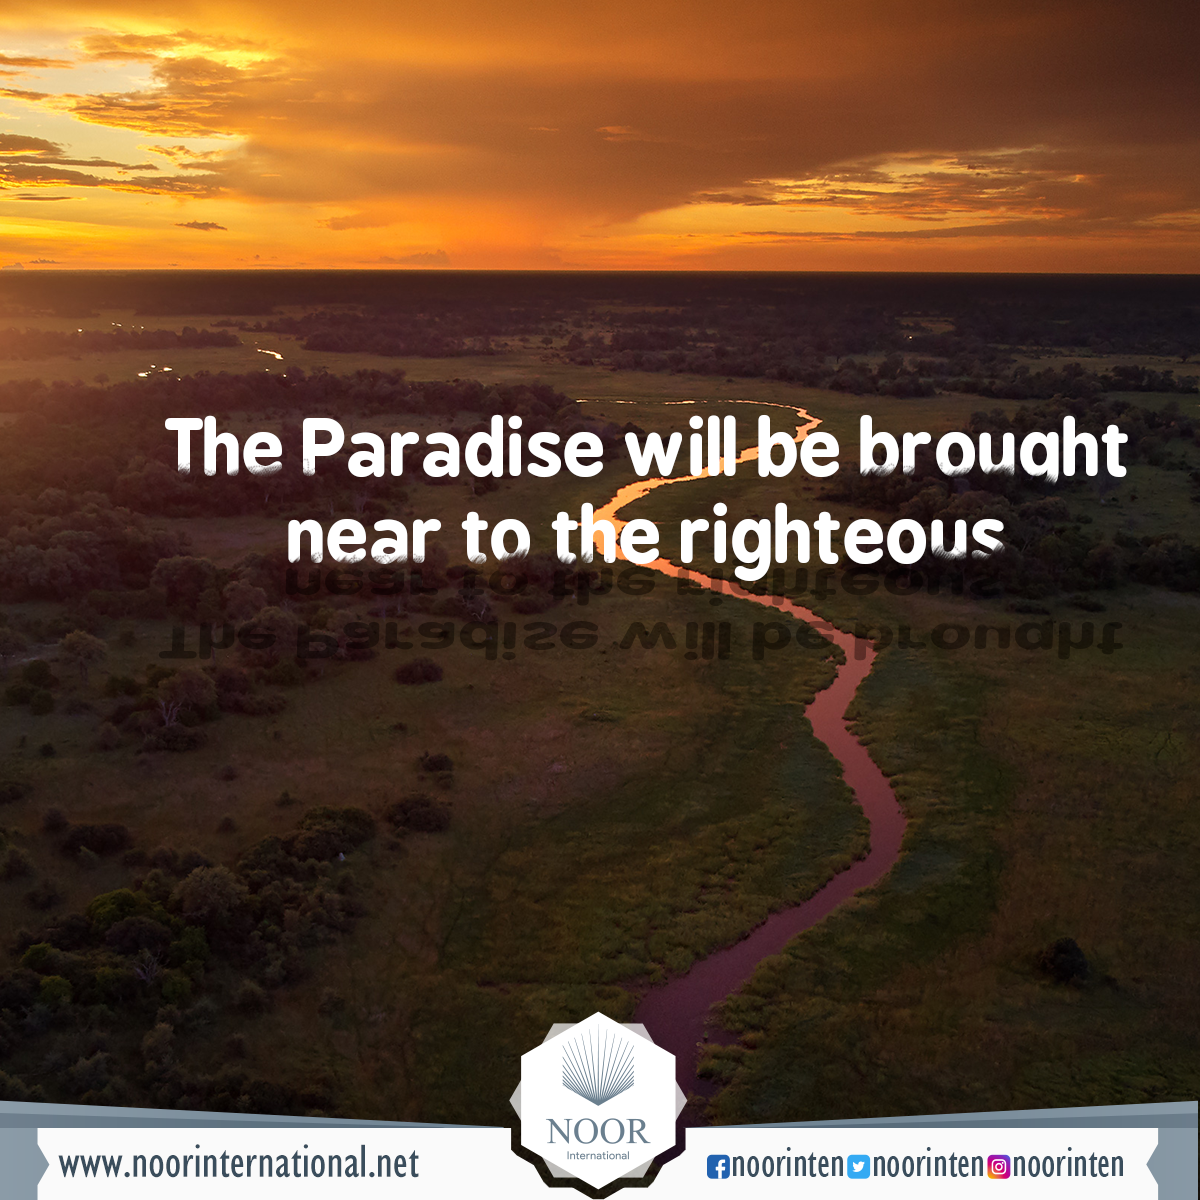 The Paradise will be brought near to the righteous